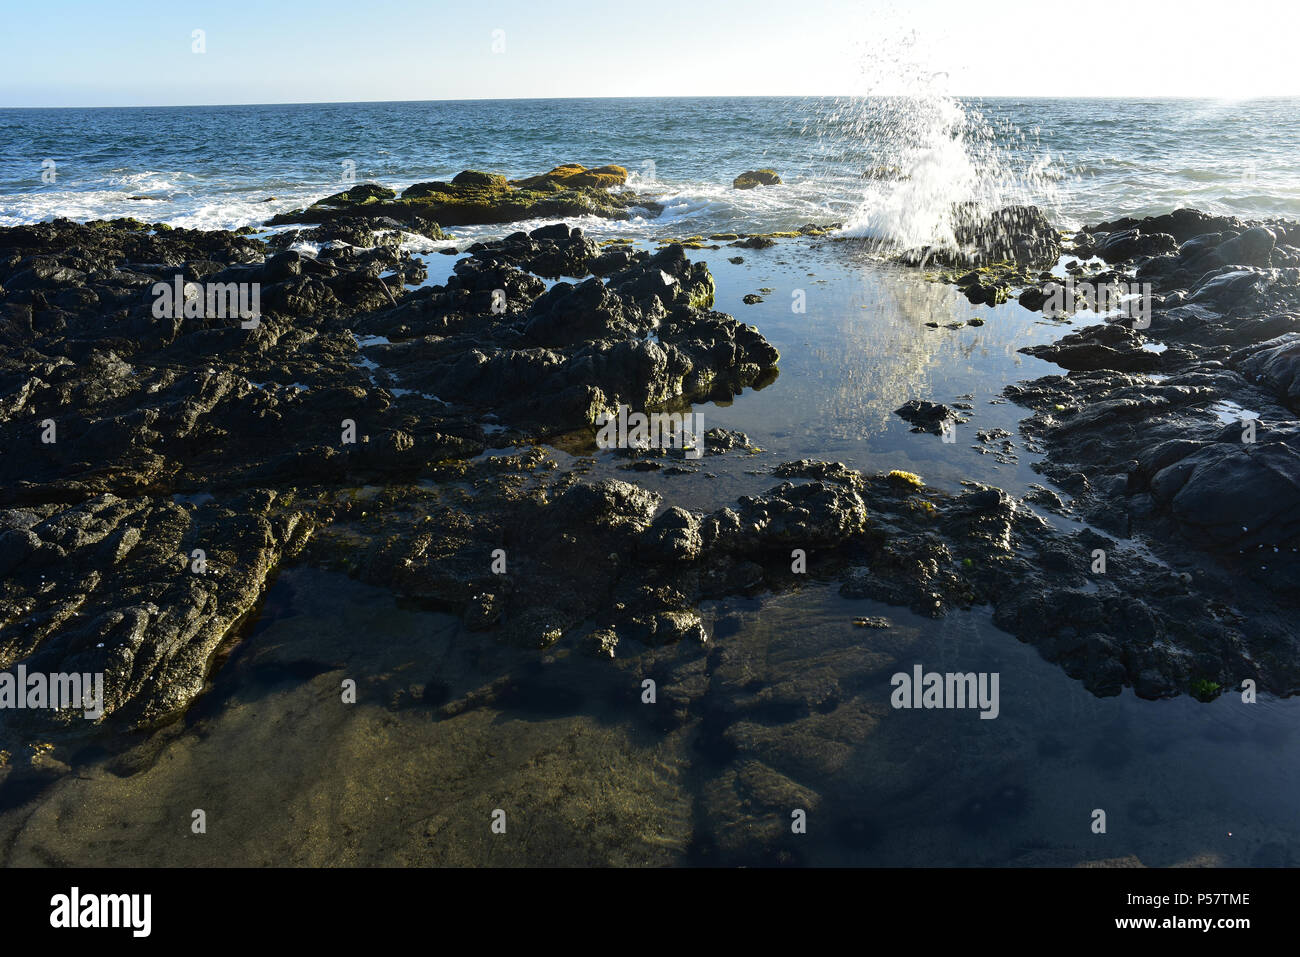 splashing wave of pacific reflected in calm tidal pool amid rocks Stock Photo